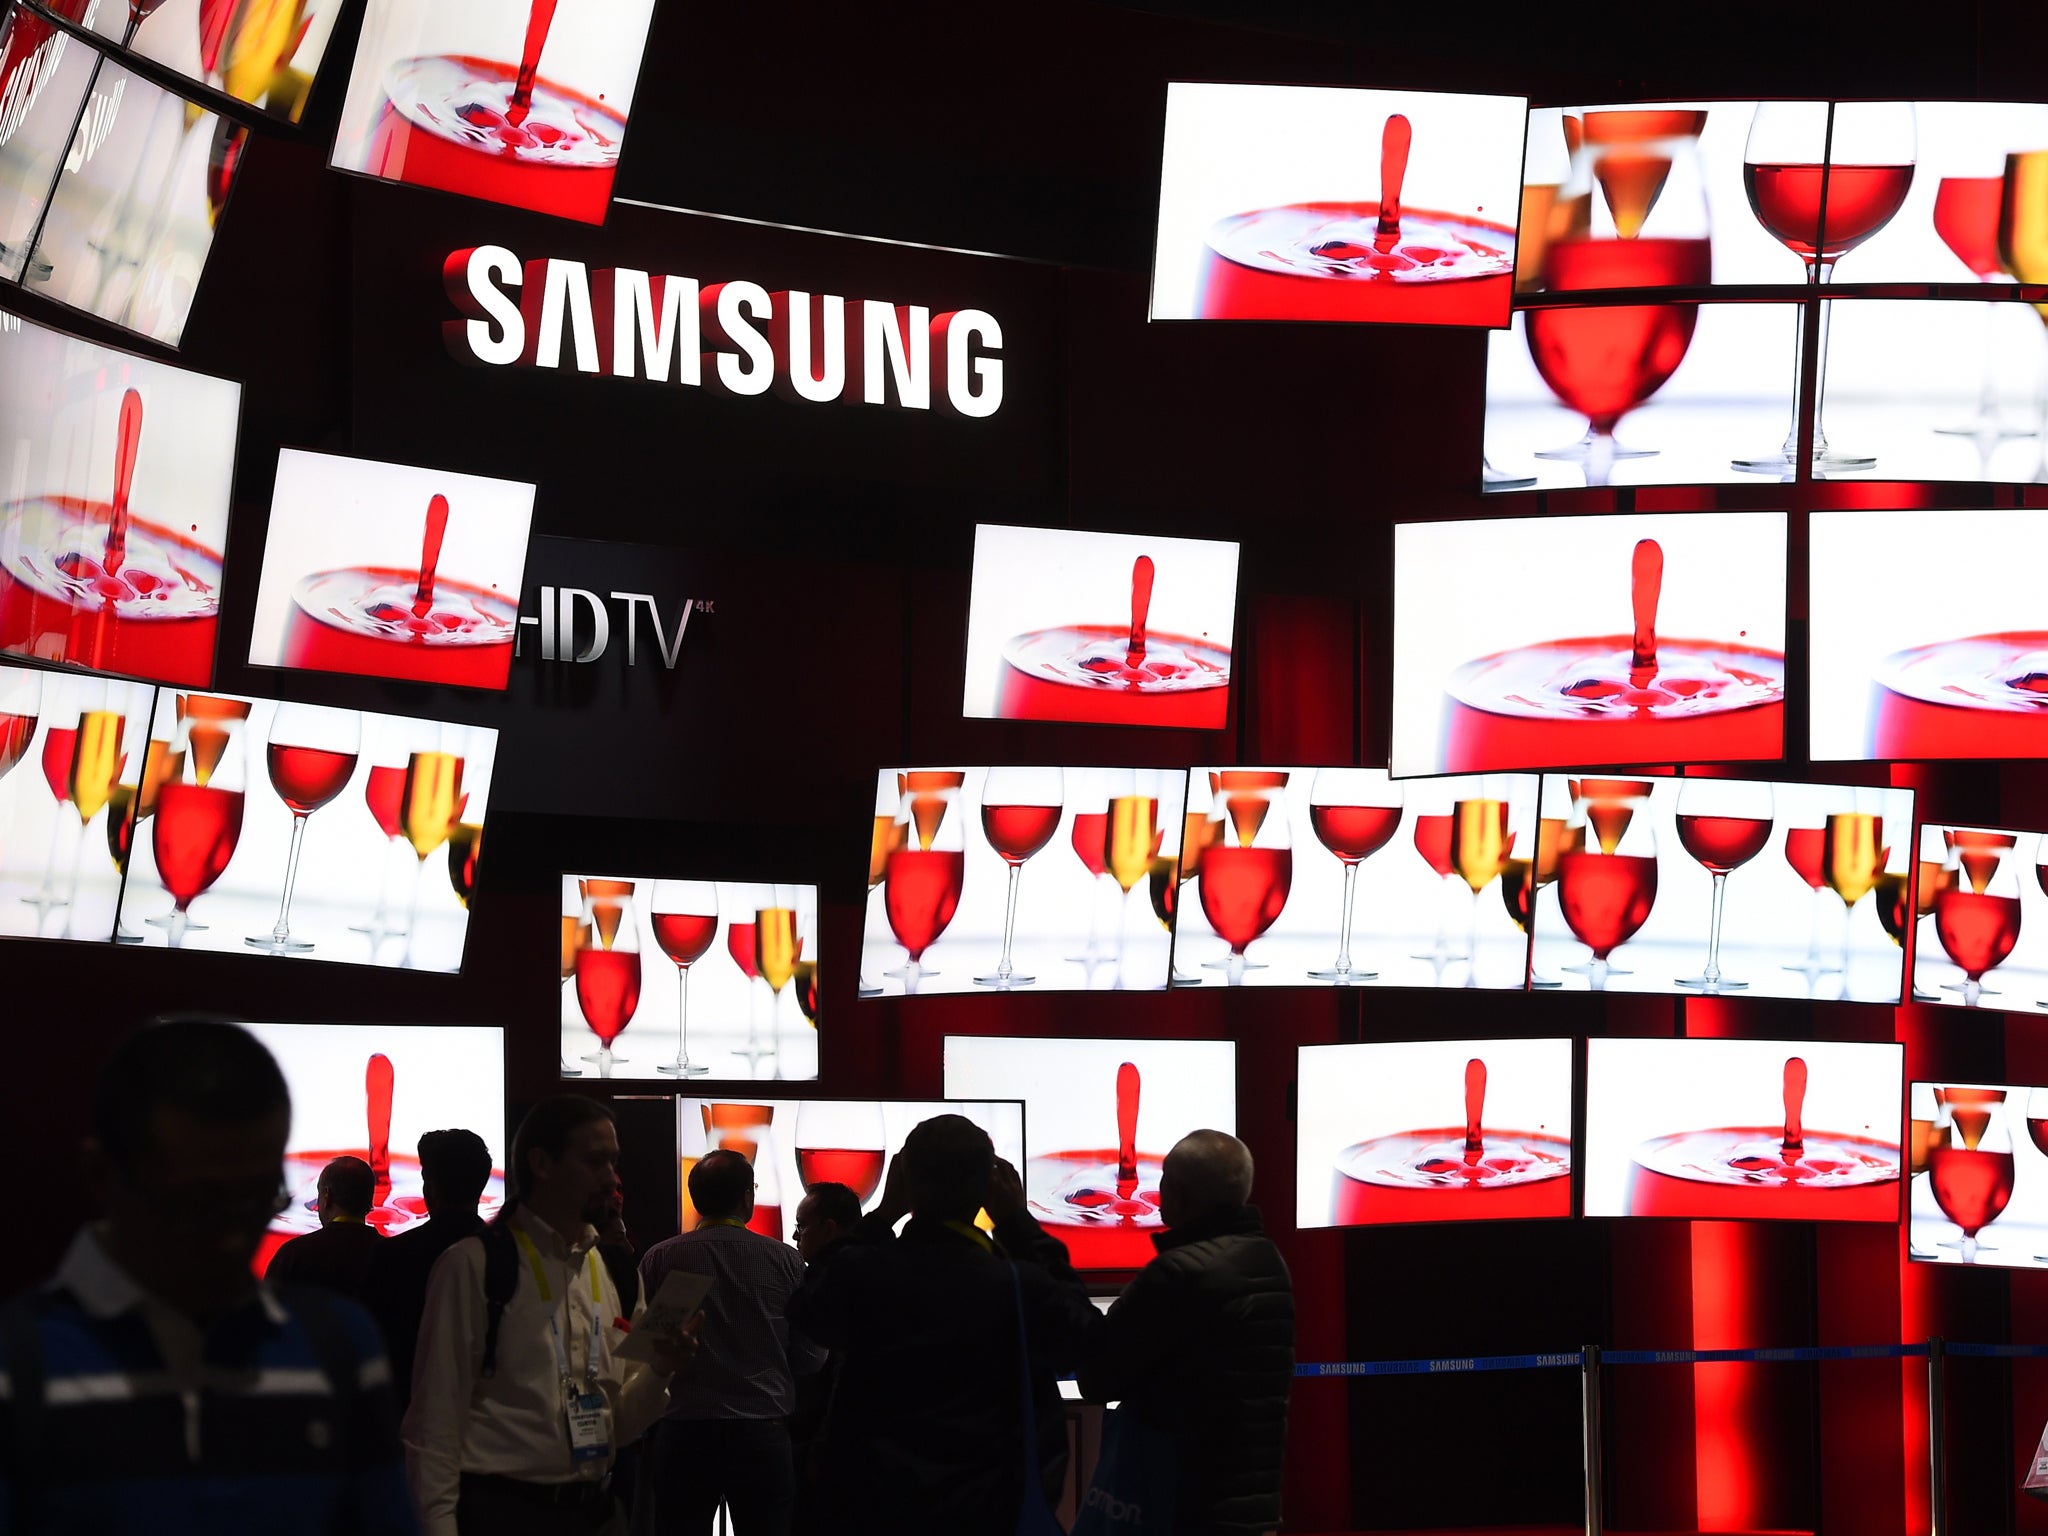 Samsung TVs being demonstrated at this year's Consumer Electronics Show